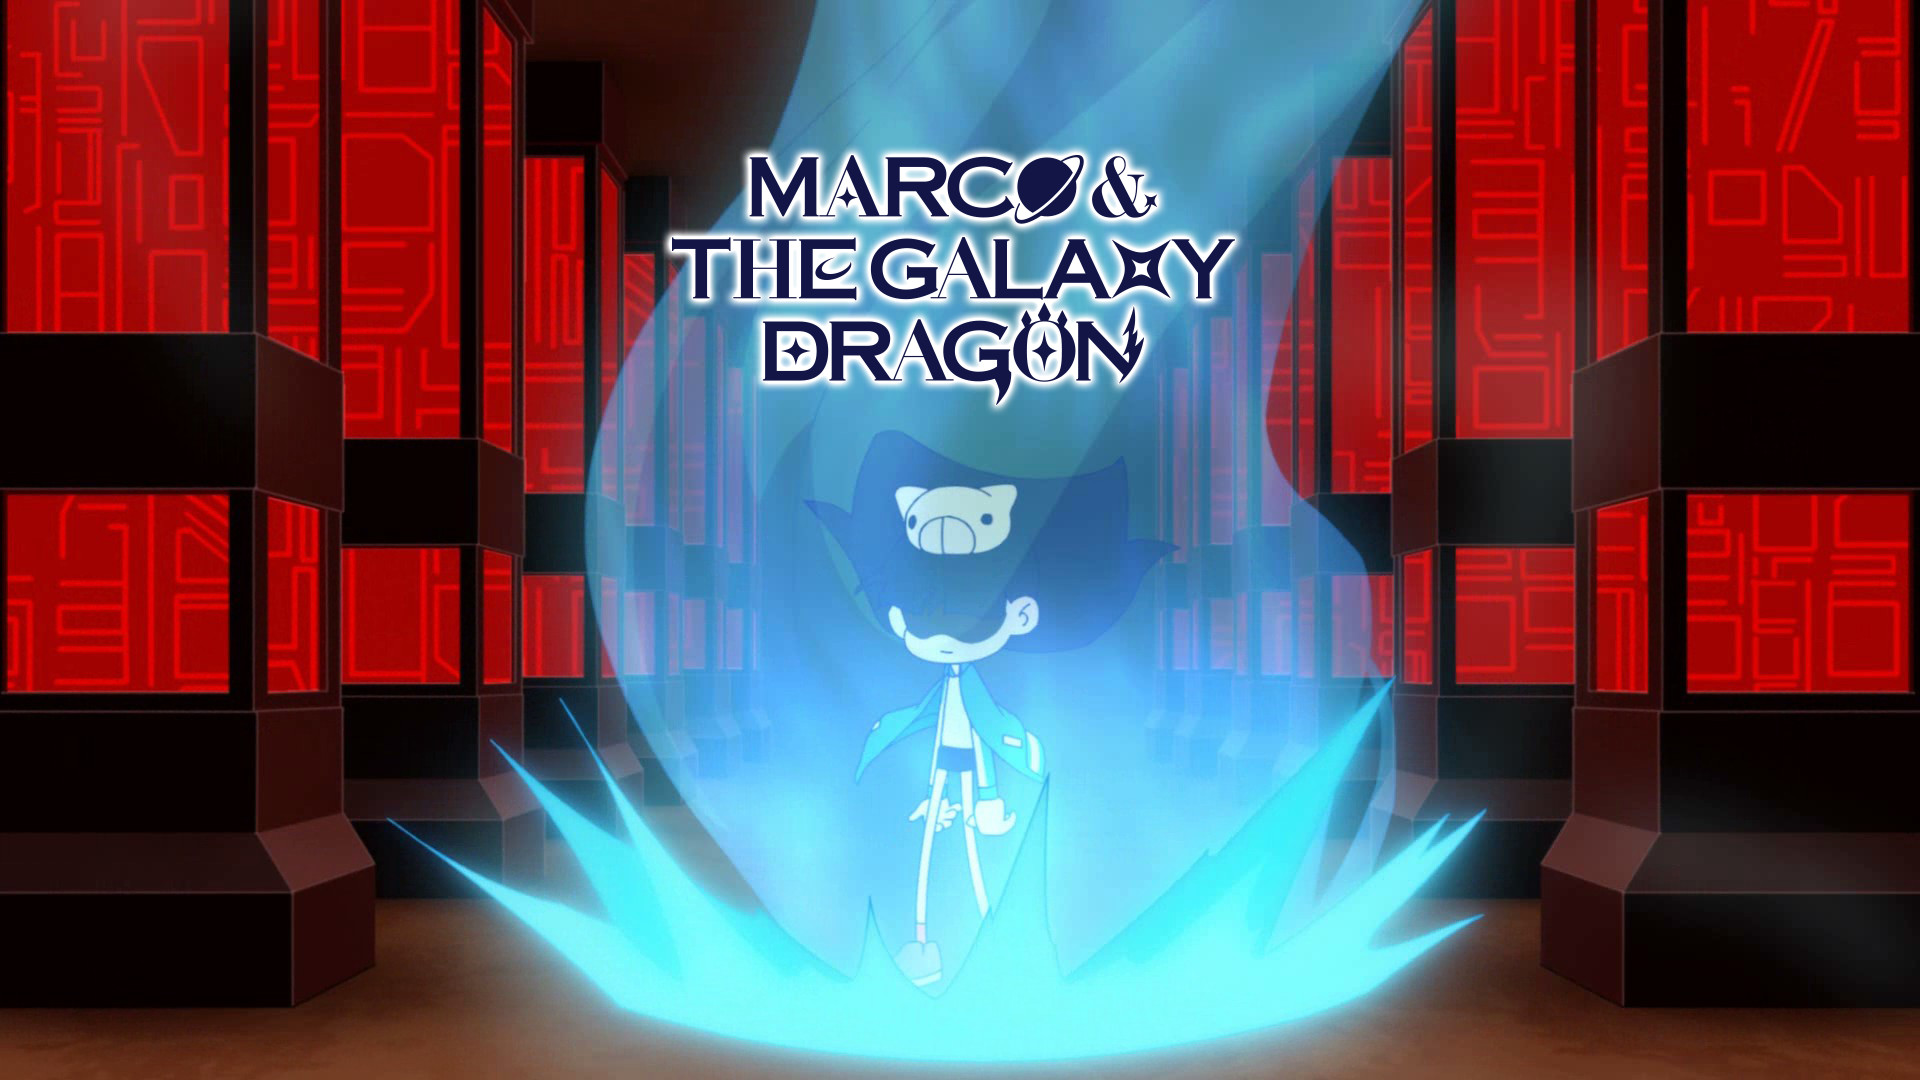 Marco & The Galaxy Dragon - Animation Soundtrack Featured Screenshot #1